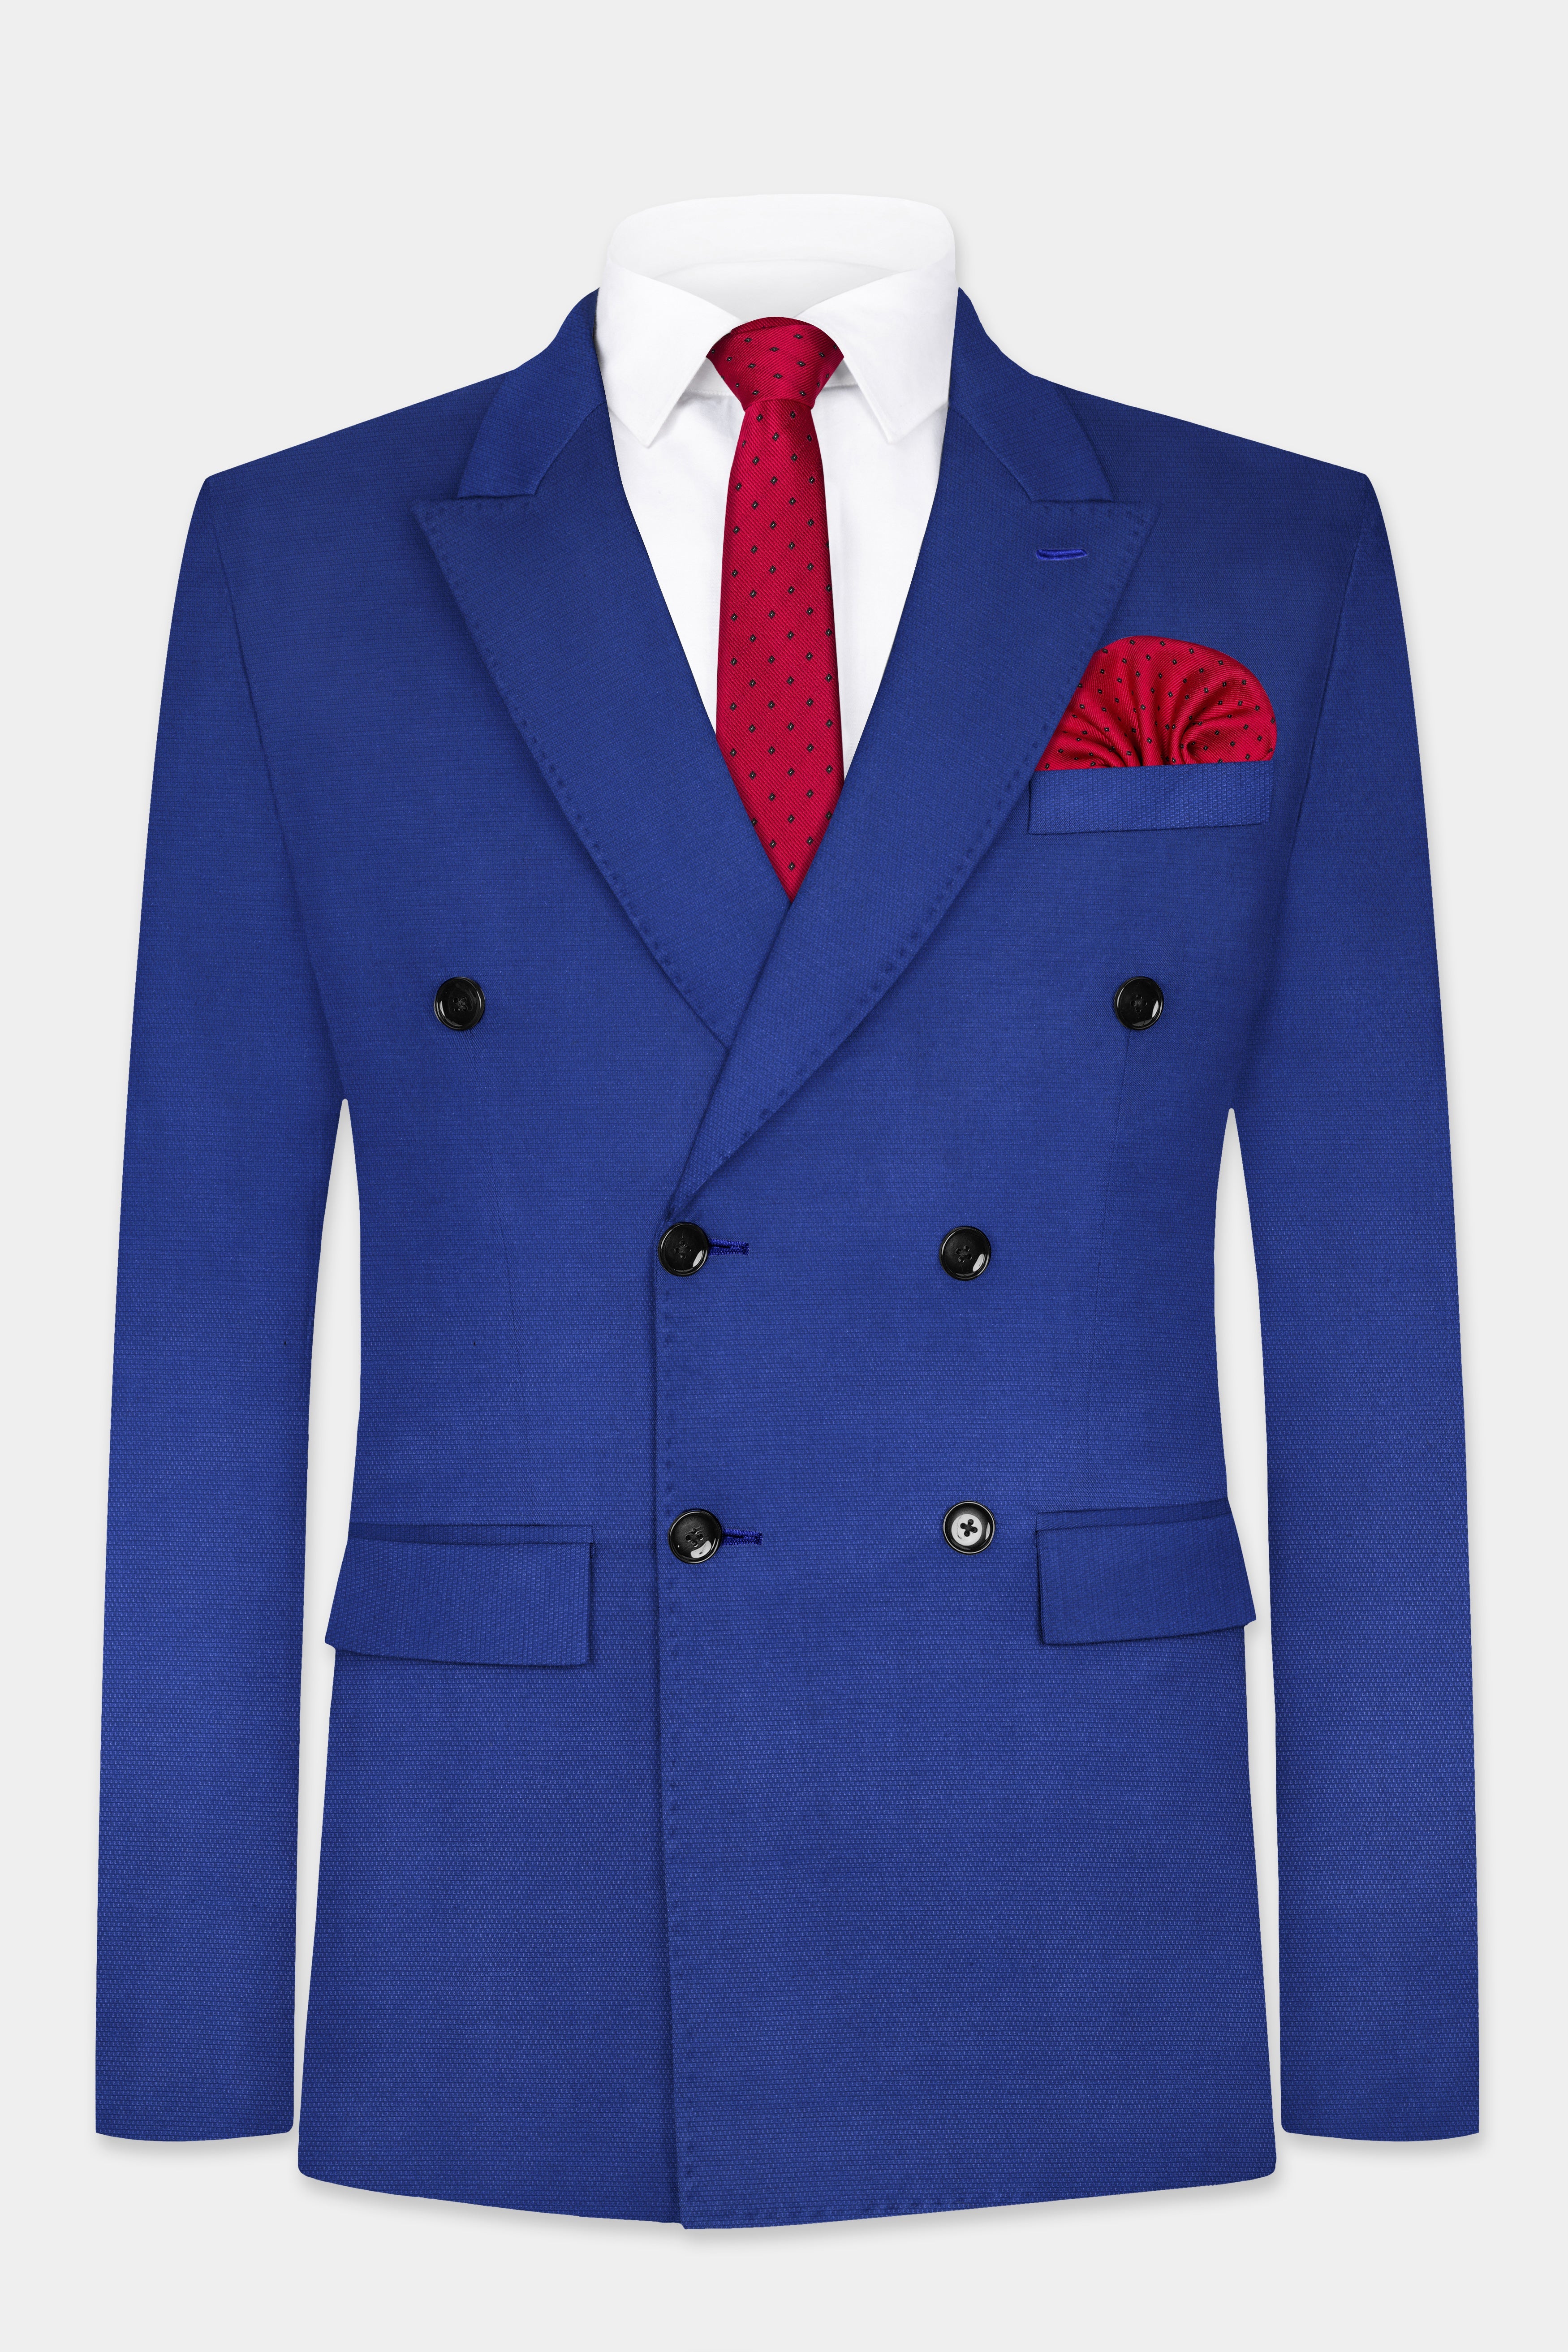 Catalina Blue Double-Breasted Wool Blend Suit